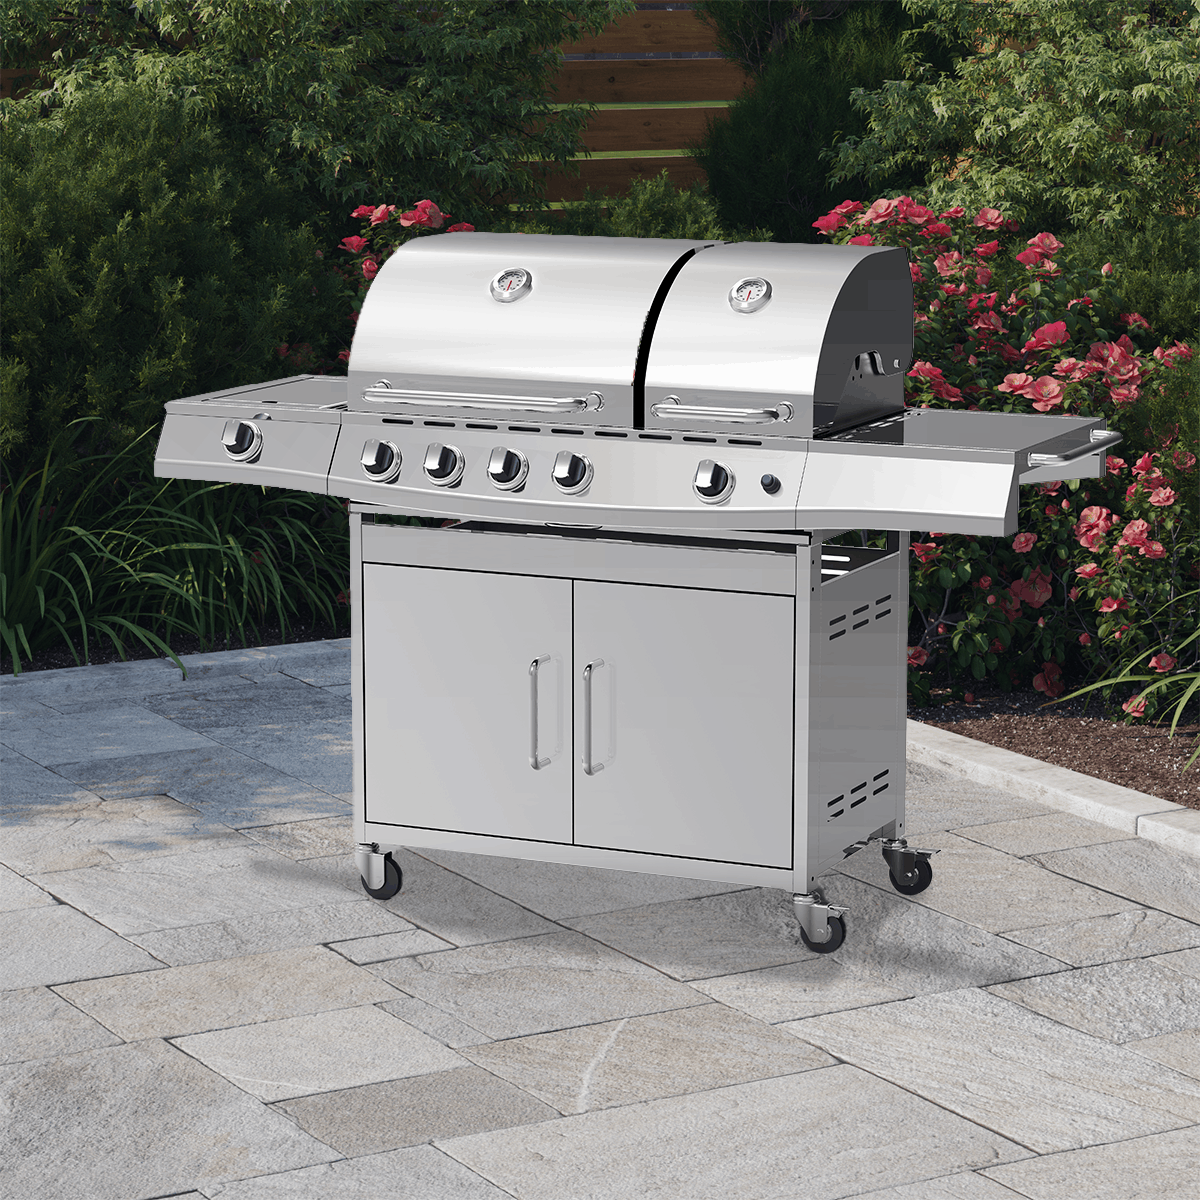 BillyOh Stainless Steel Dallas 5 burner Gas BBQ on patio